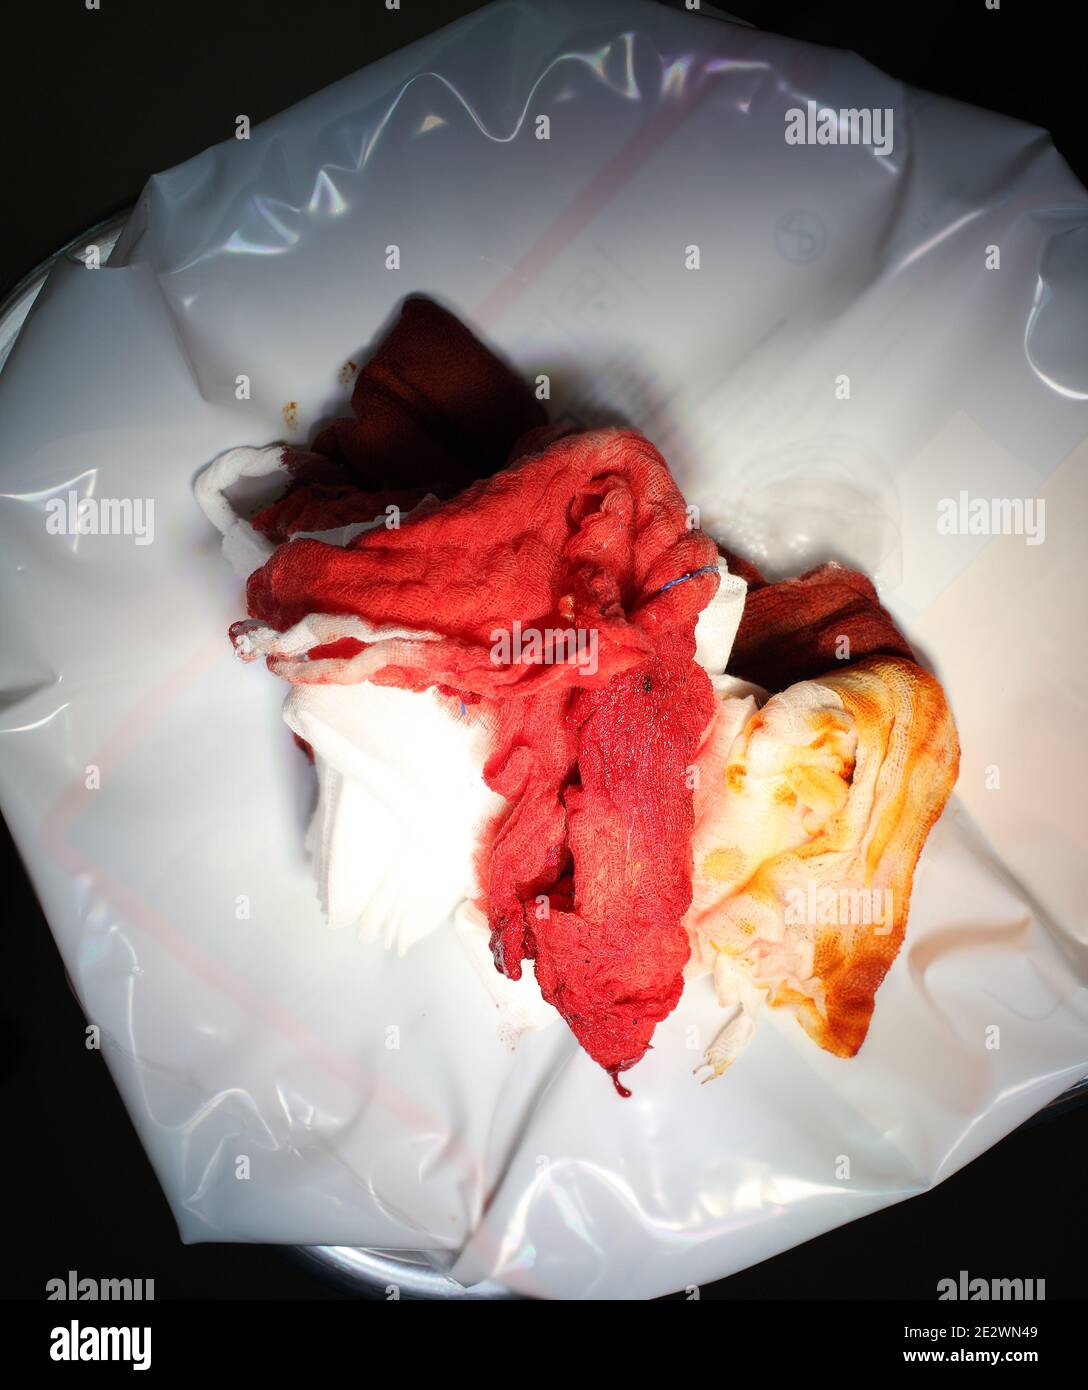 Blood on the gauze during surgical operation. Stock Photo